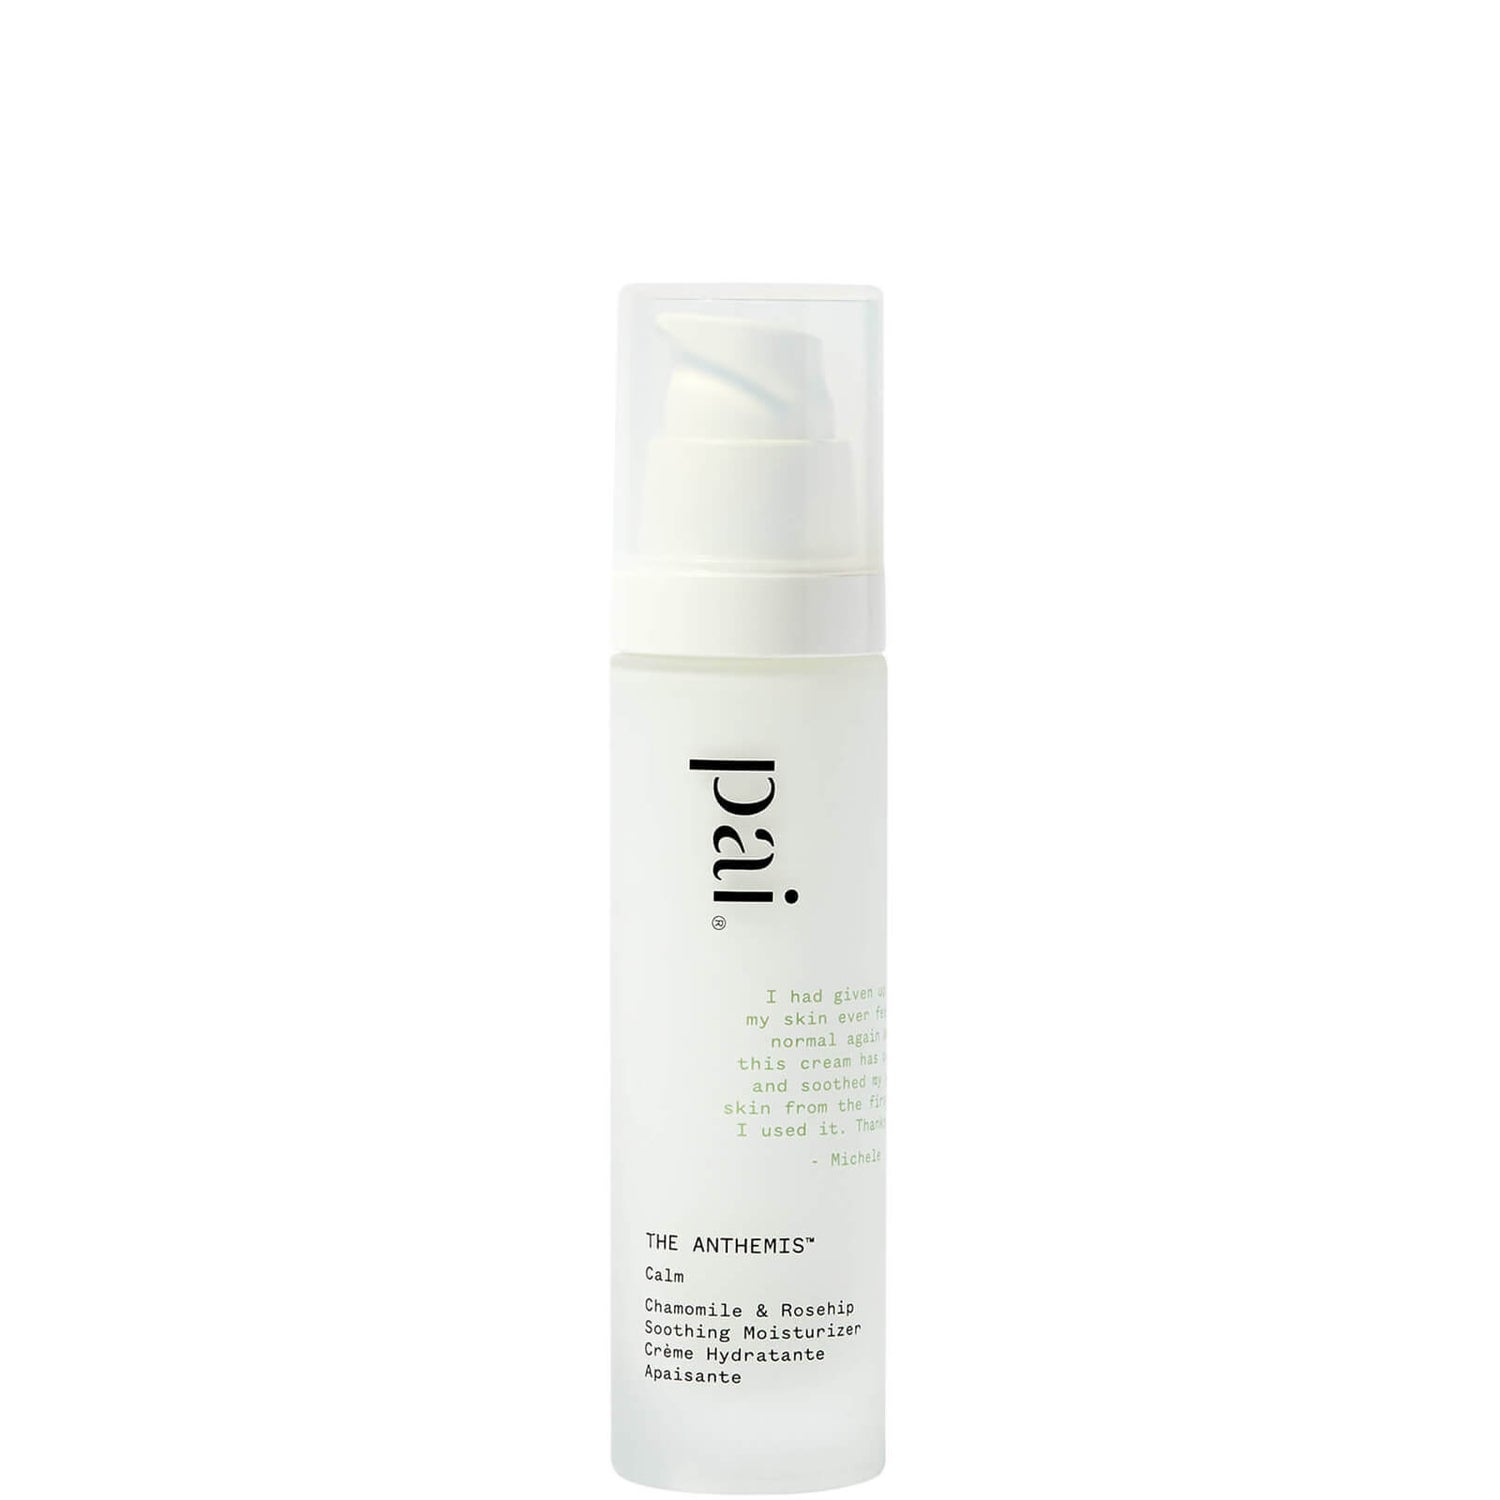 Pai Skincare The Anthemis Chamomile and Rosehip Soothing Moisturizer 50ml